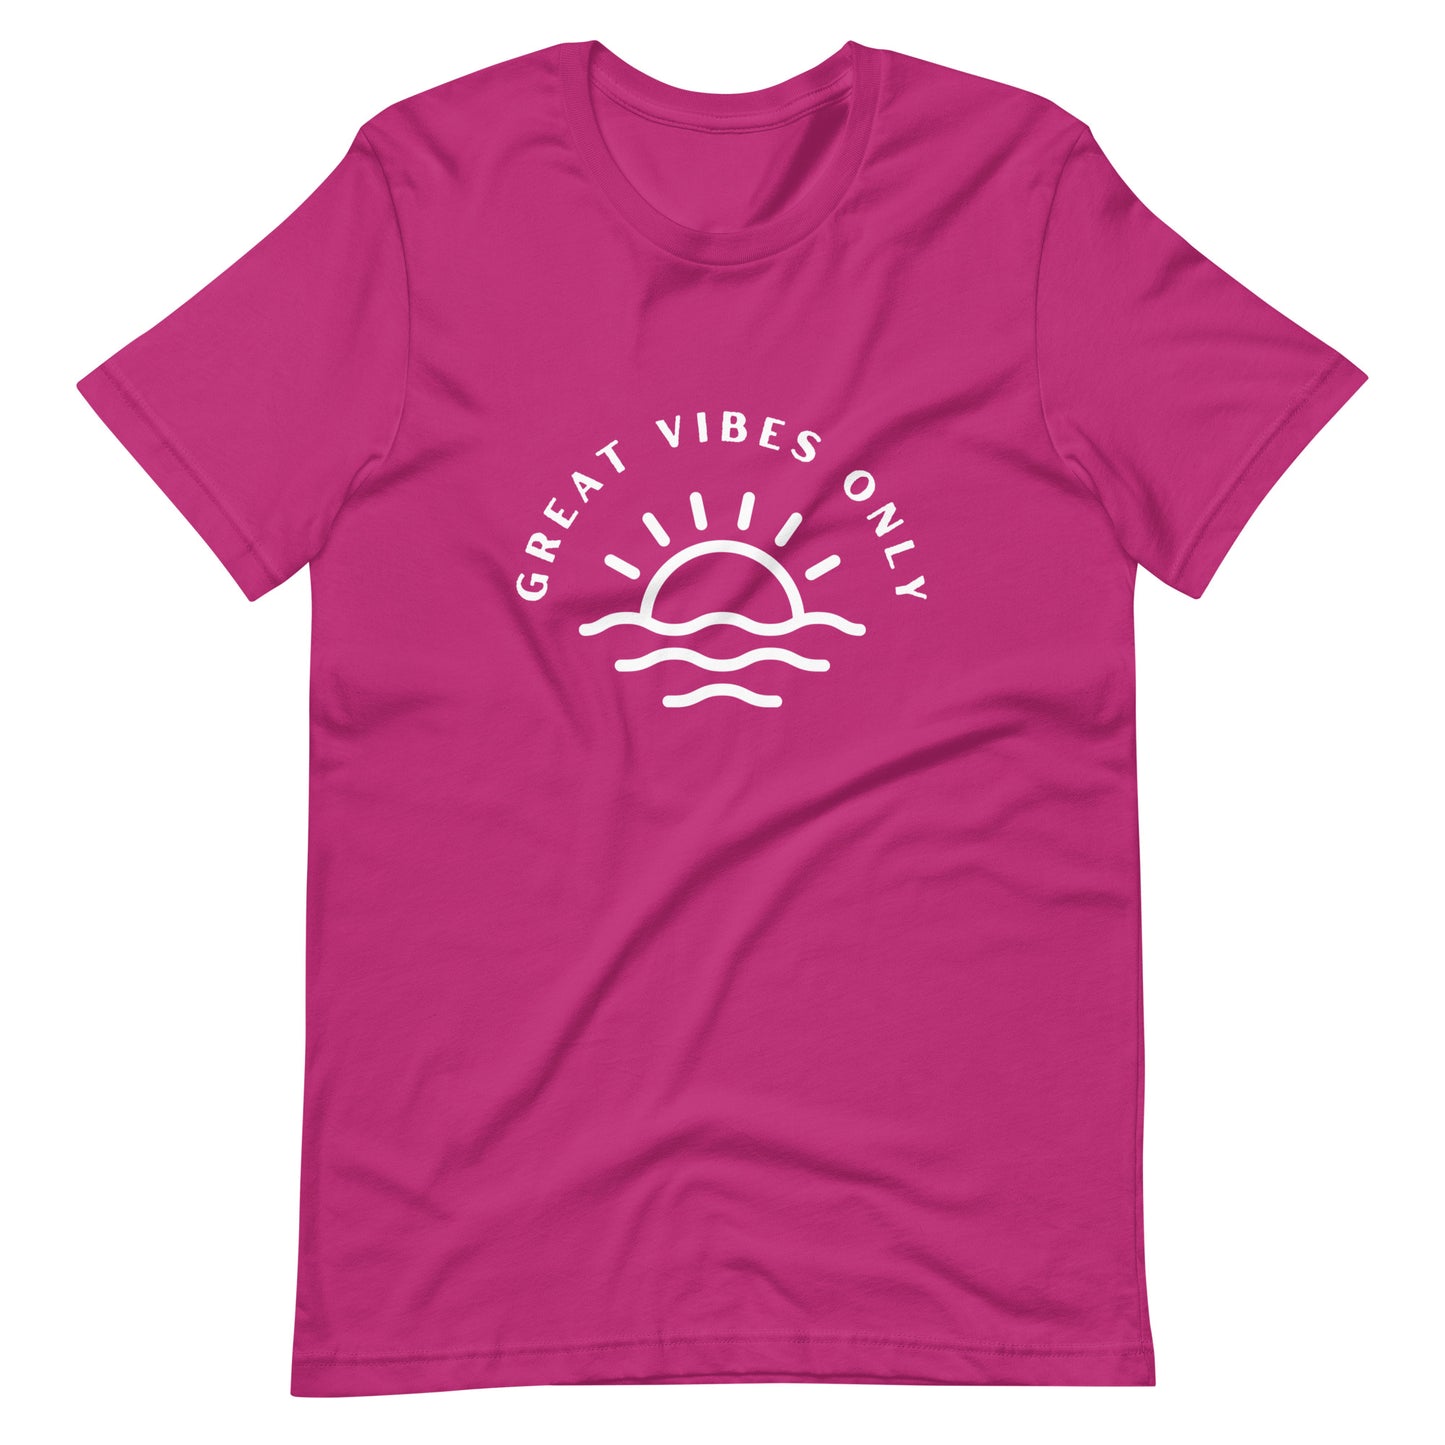 Great Vibes Only t-shirt